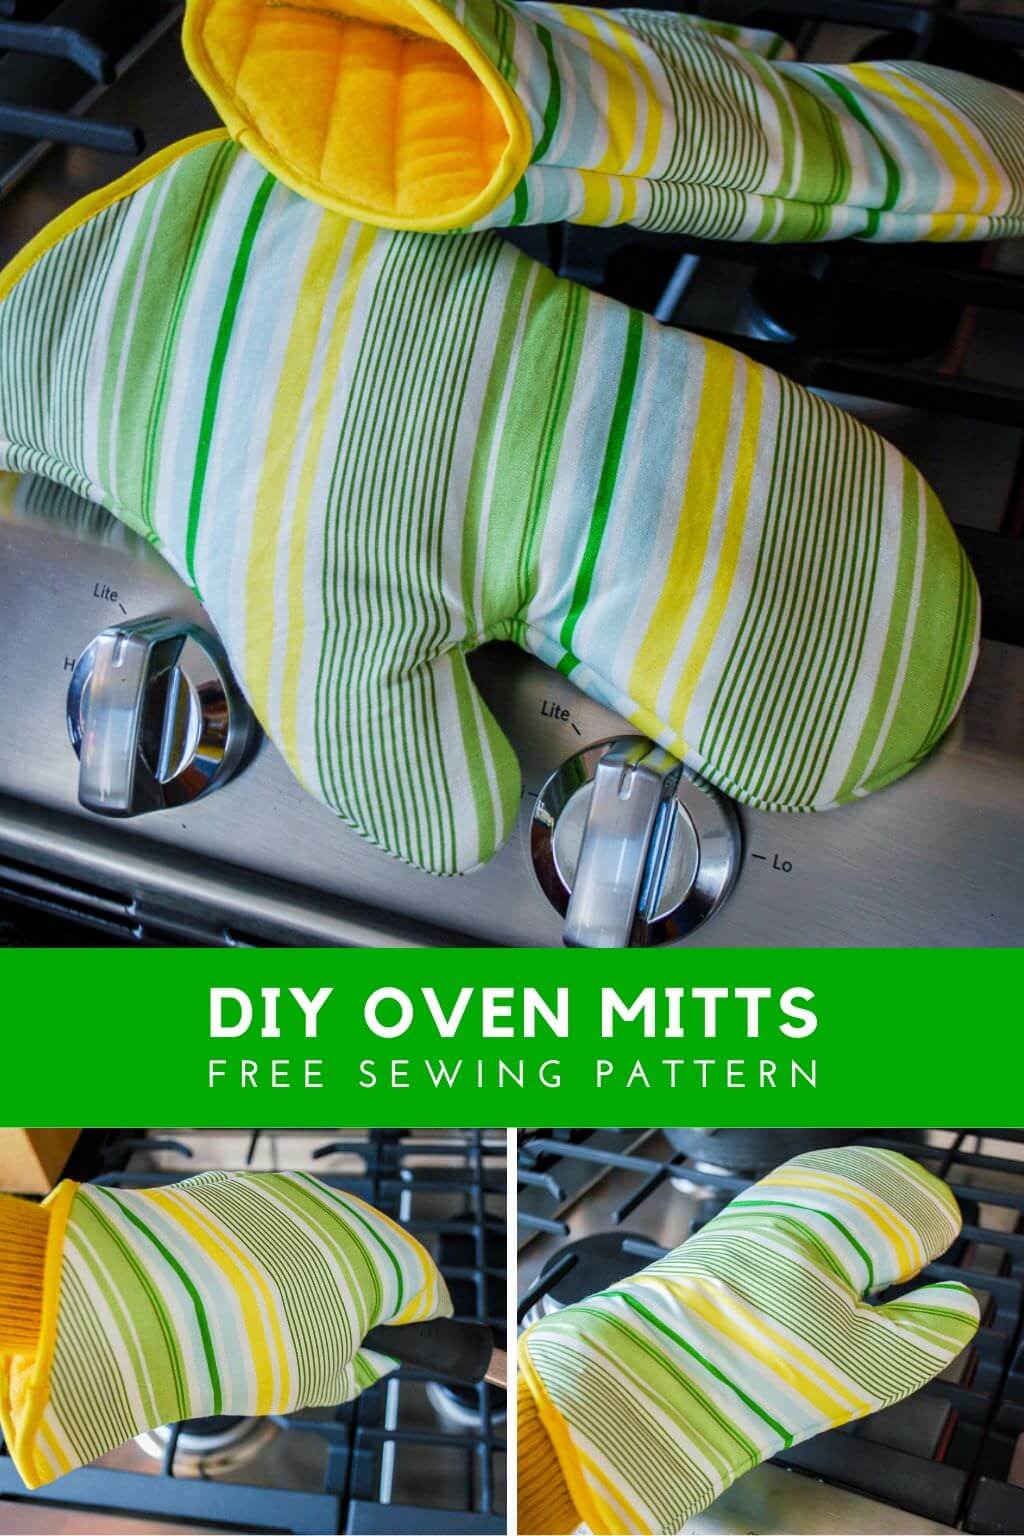 DIY oven mitts free sewing pattern